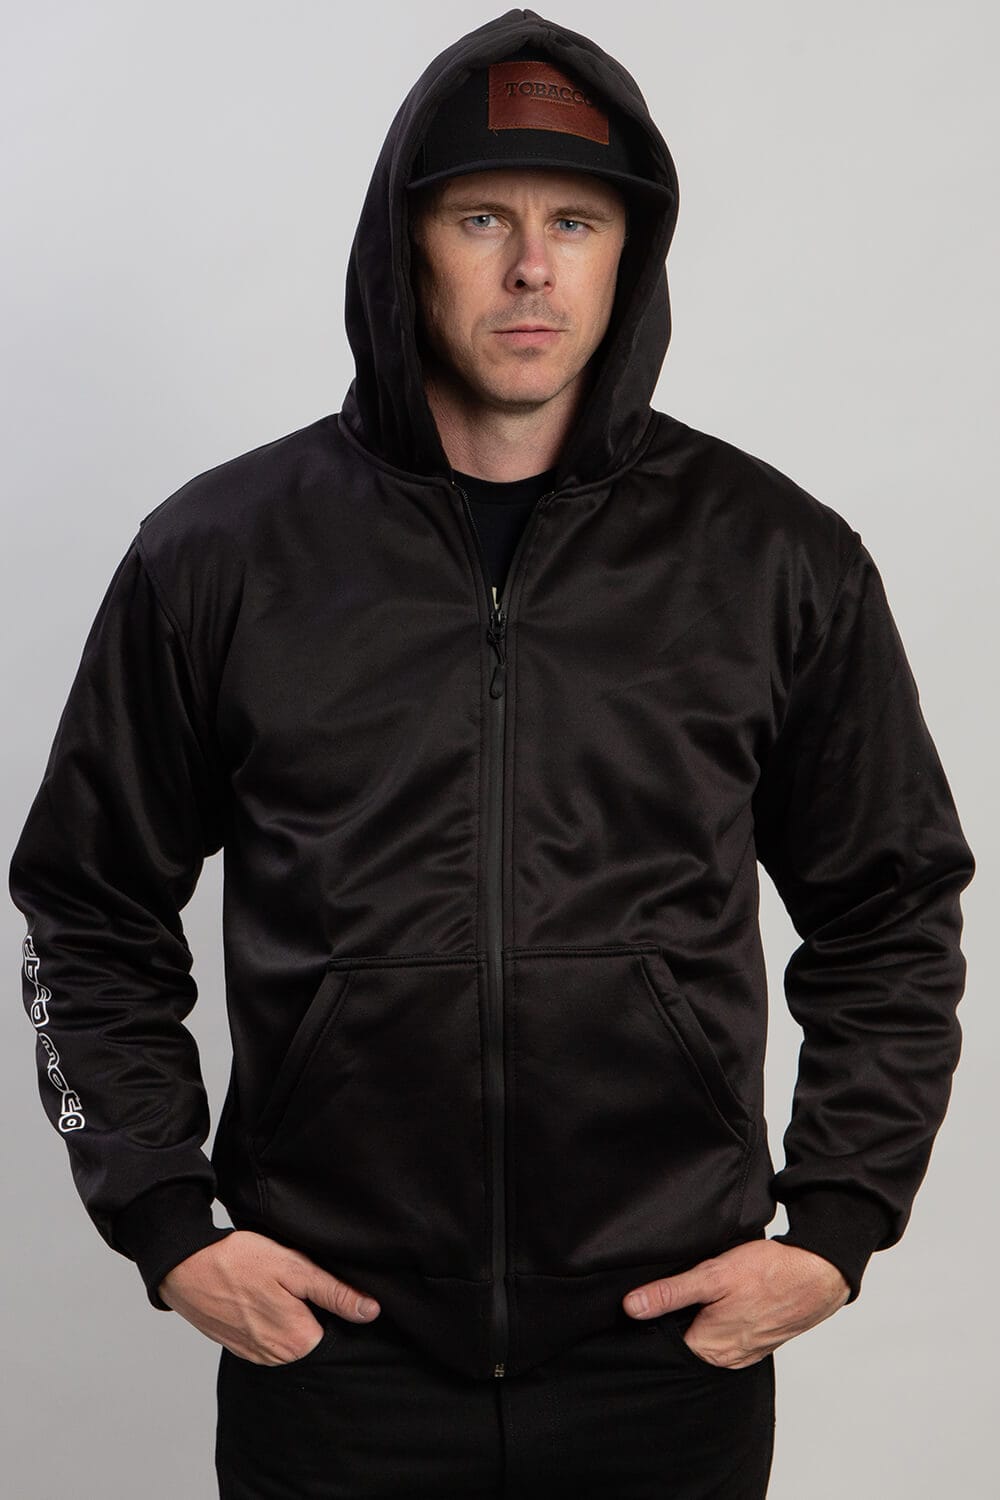 Hoodie jacket, fully lined with KEVLAR®